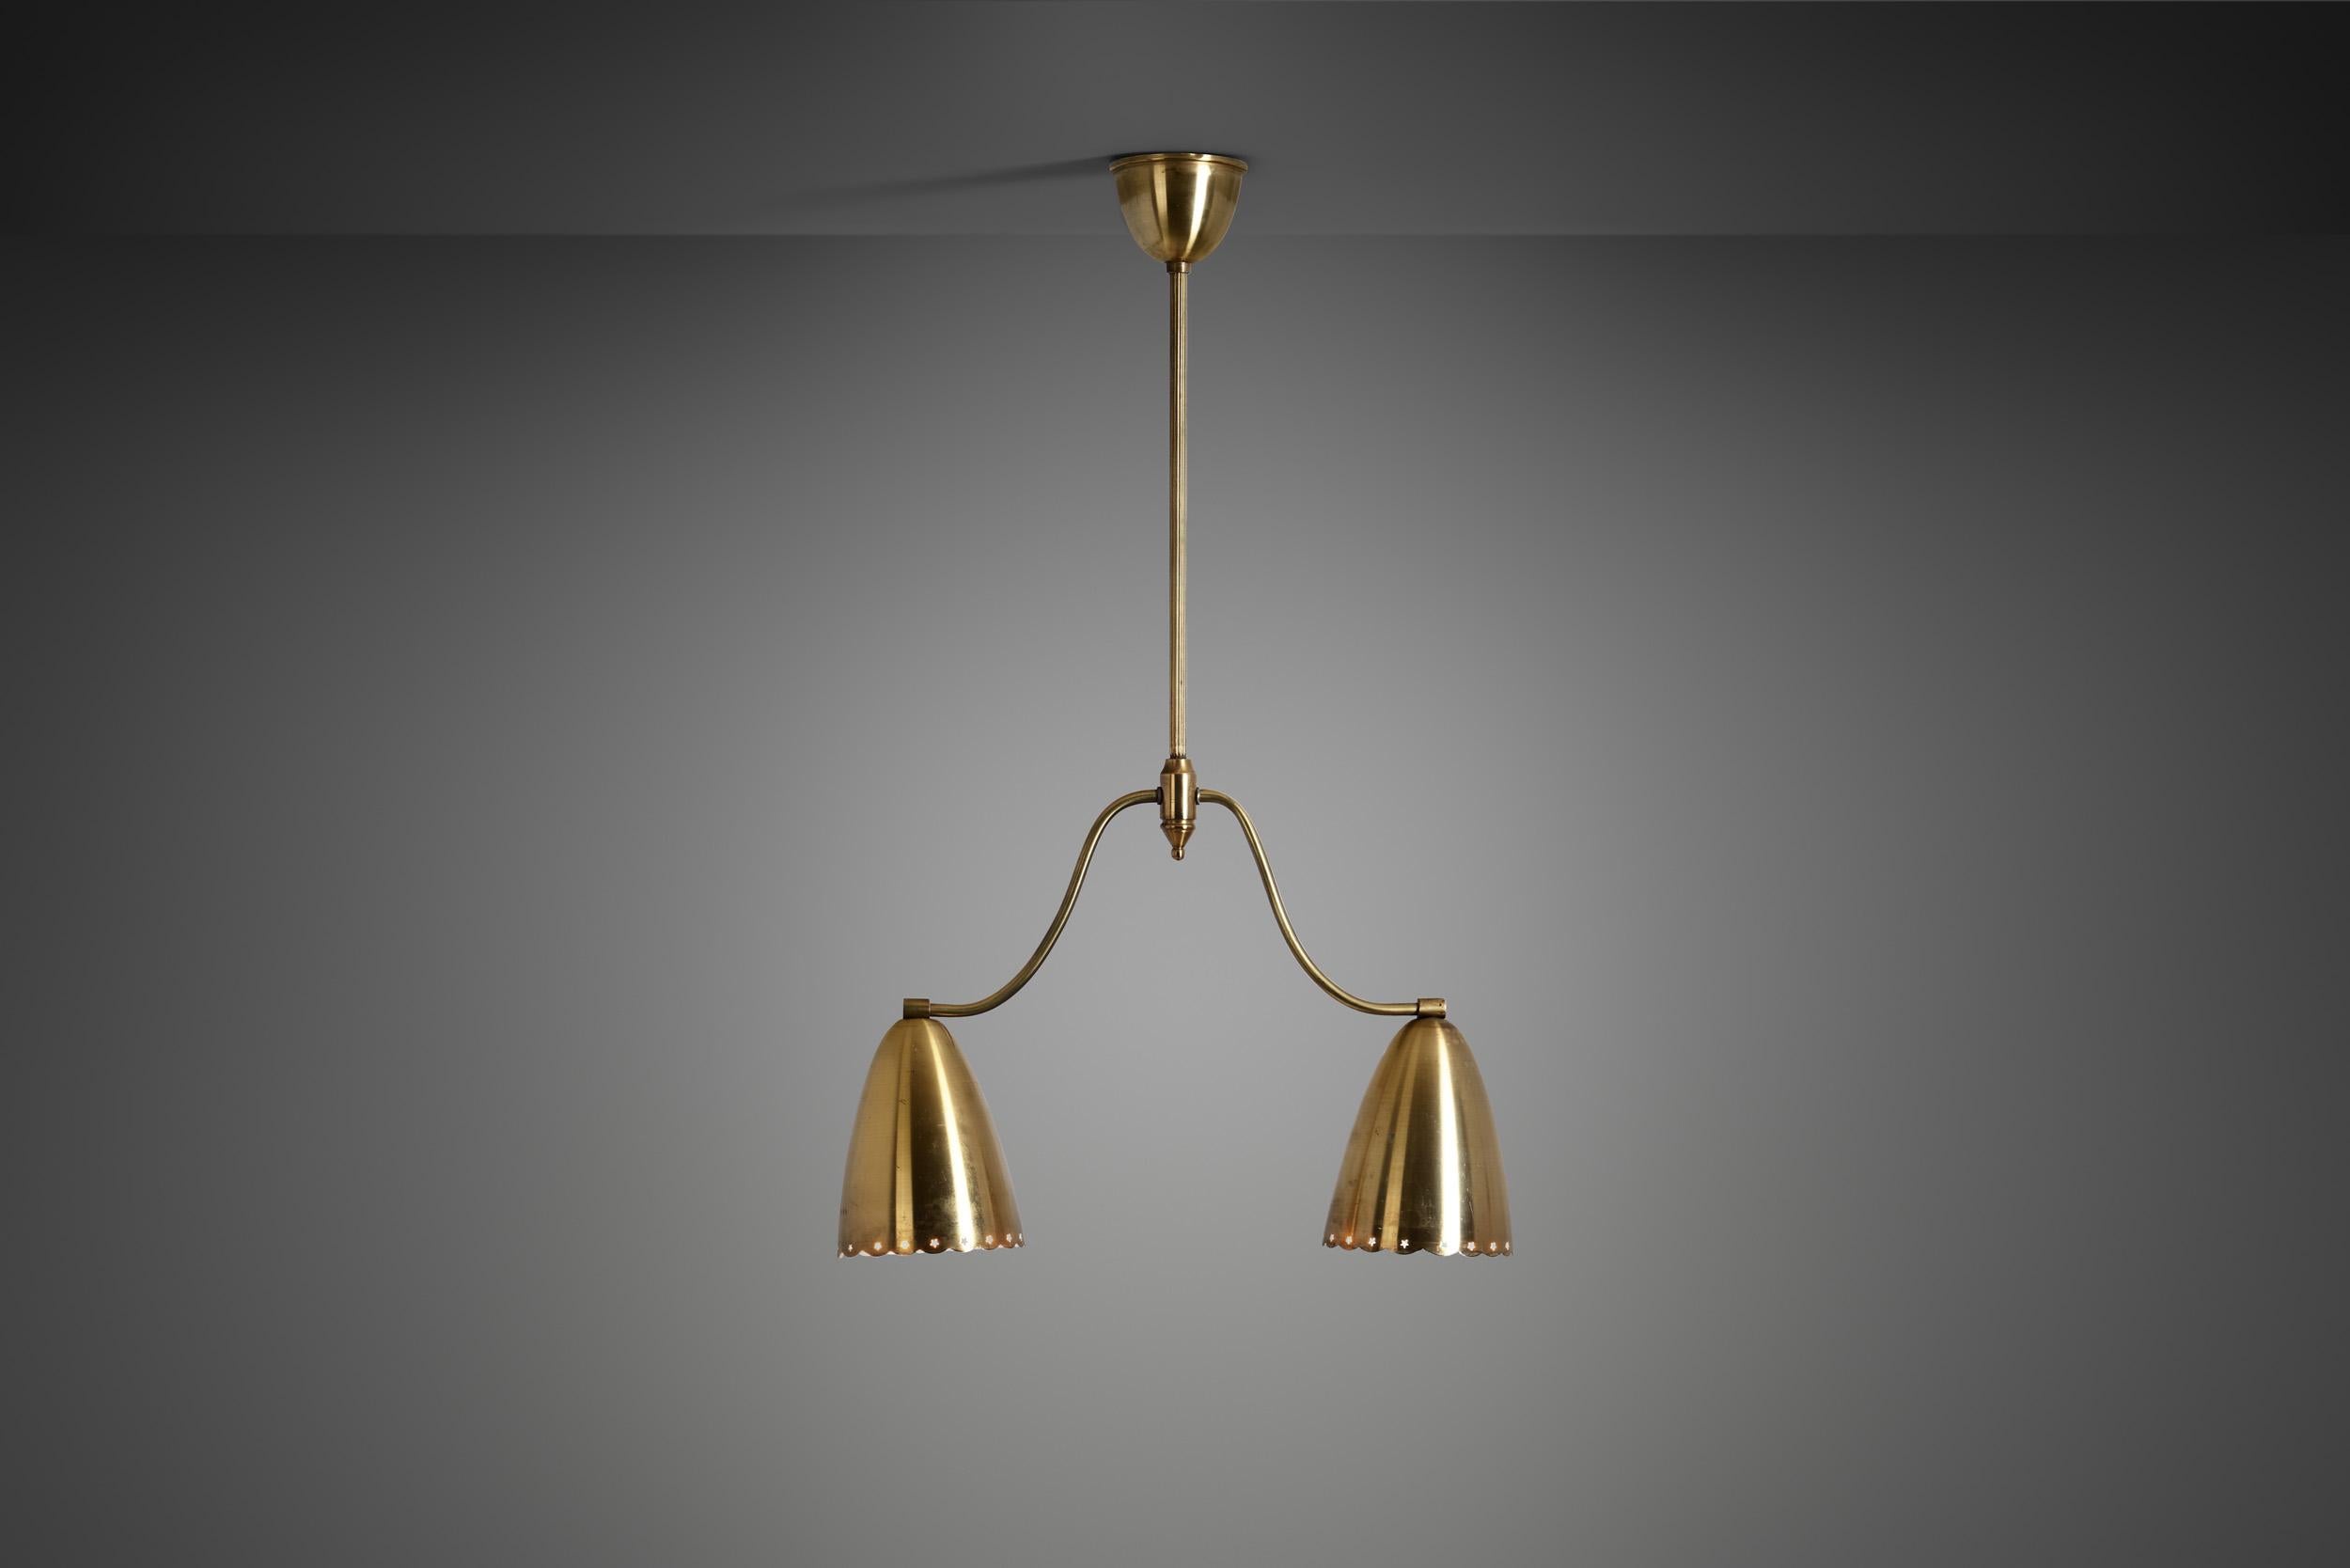 Brass Swedish Two-Arm Ceiling Light with Star Decoration, Sweden 1940s For Sale